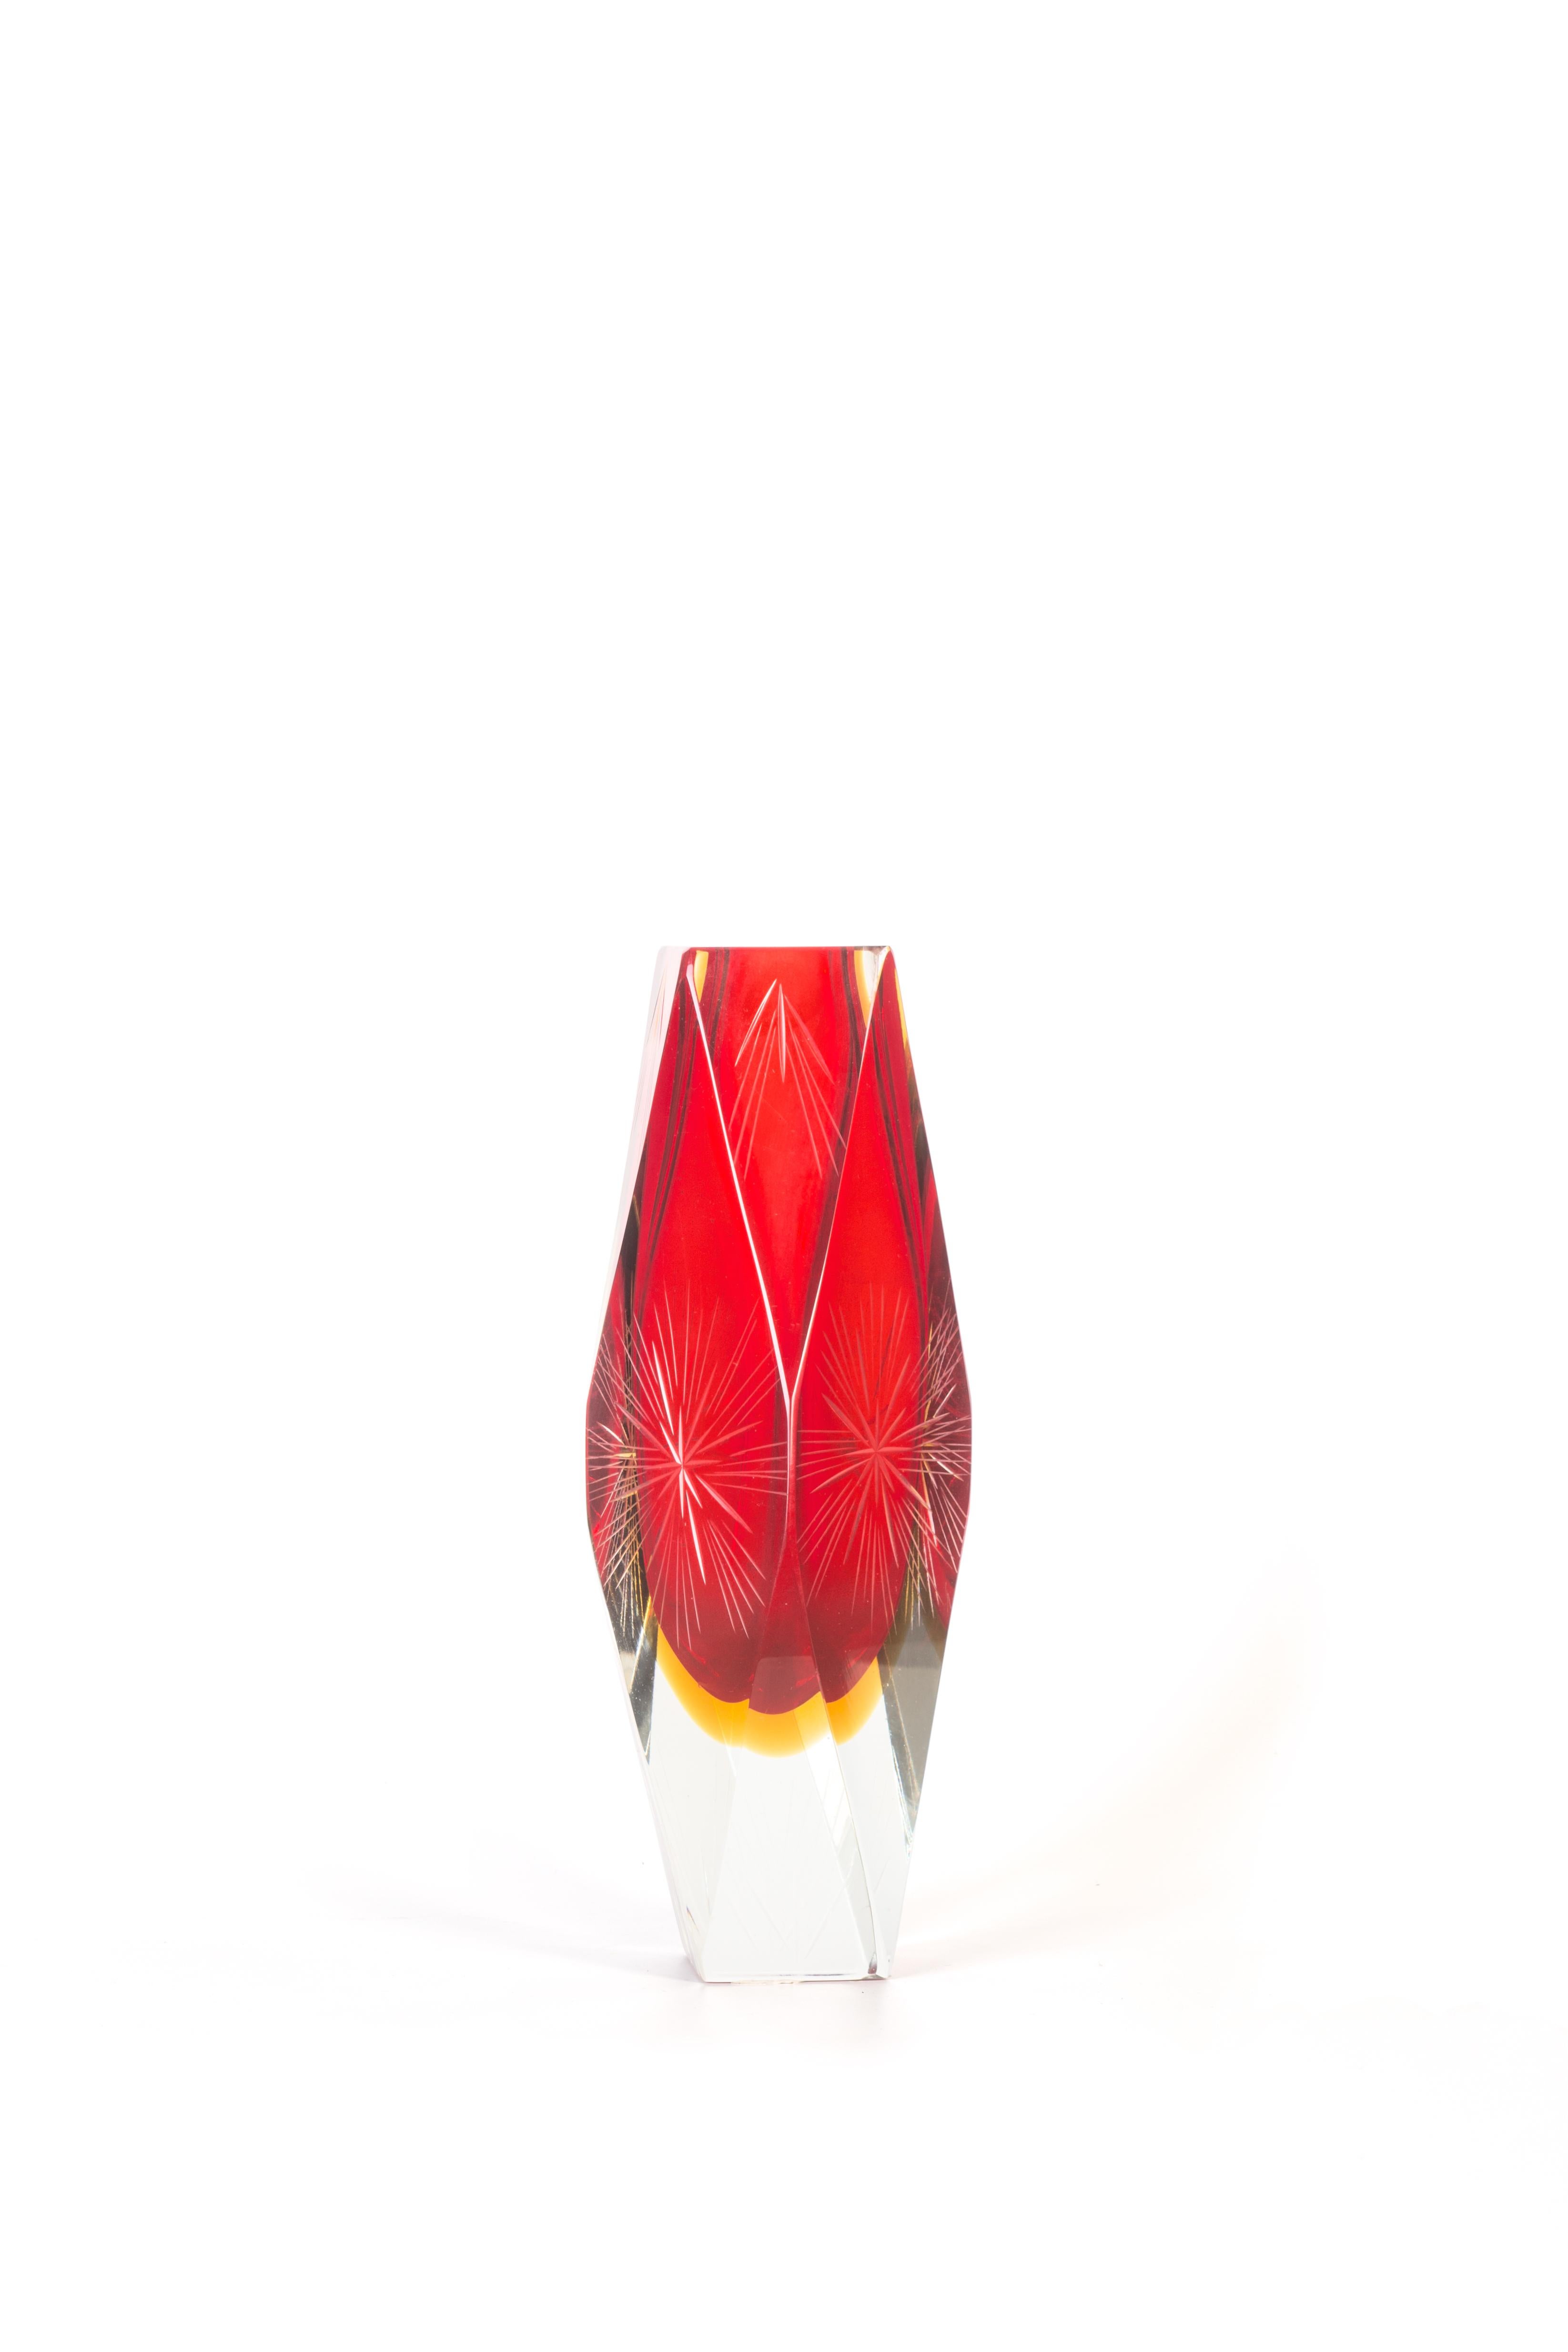 Late 20th Century Vintage Red Crystal Vase, Italy, 1970s For Sale